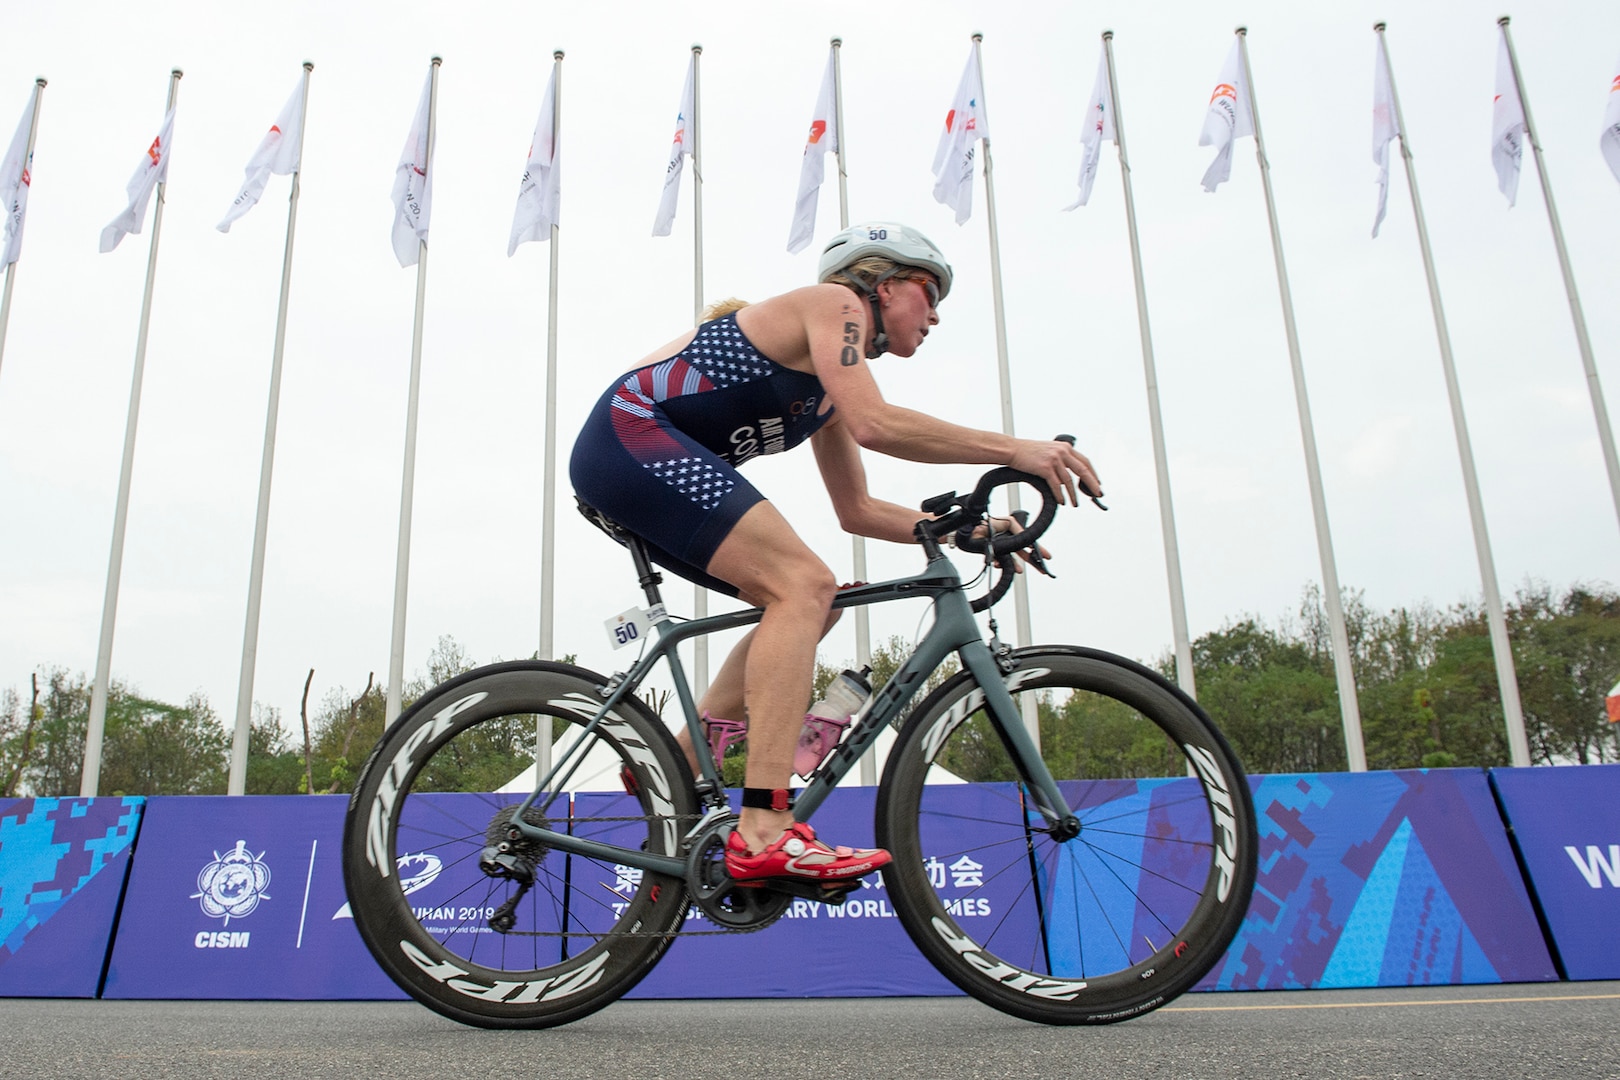 Woman triathlete rides a bicycle past a row of flagpoles that stand behind a blue course barrier.